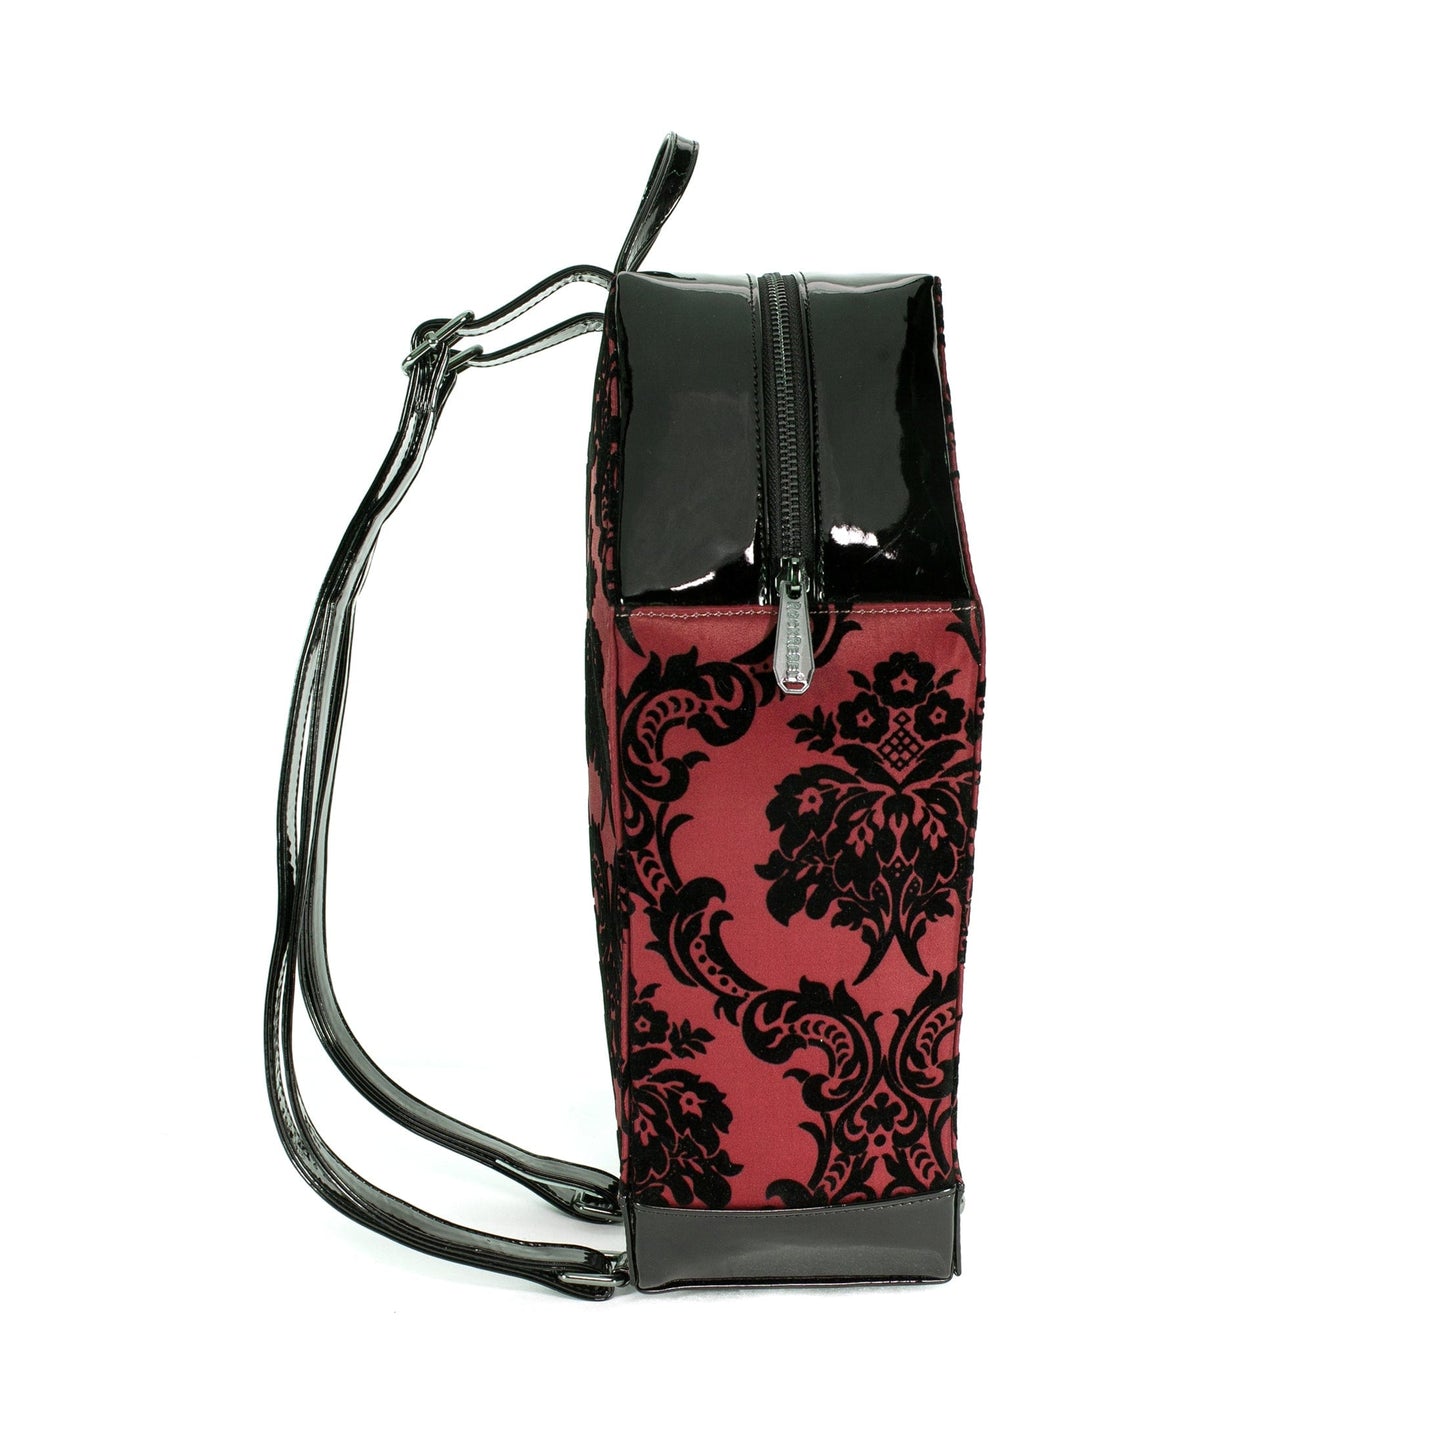 Damask Coffin Backpack in Red